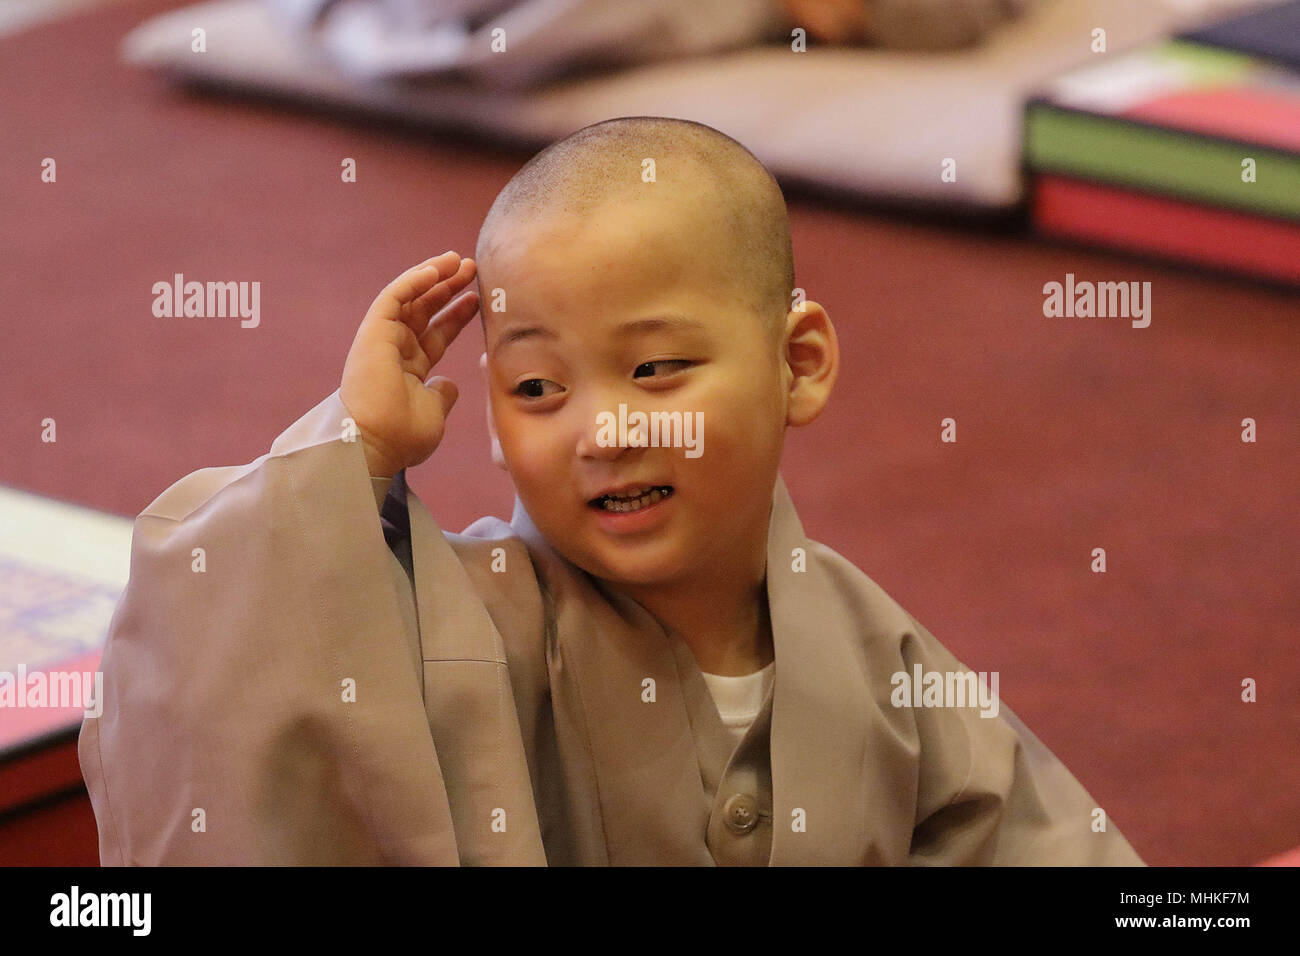 May 2, 2018 - Seoul, SOUTH KOREA - May 2, 2018-Seoul, South Korea-A child gets his head shaved by a Buddhist monk during the 'Children Becoming Buddhist Monks' ceremony forthcoming buddha's birthday at a Chogye temple in Seoul, South Korea. Children have their hair shaved off during the 'Children Becoming Buddhist Monks' ceremony ahead of buddha's birthday at a Chogye temple. The children will stay at the temple to learn about Buddhism for 20 days. Buddha was born approximately 2,562 years ago, and although the exact date is unknown, Buddha's official birthday is celebrated on the full moon in Stock Photo